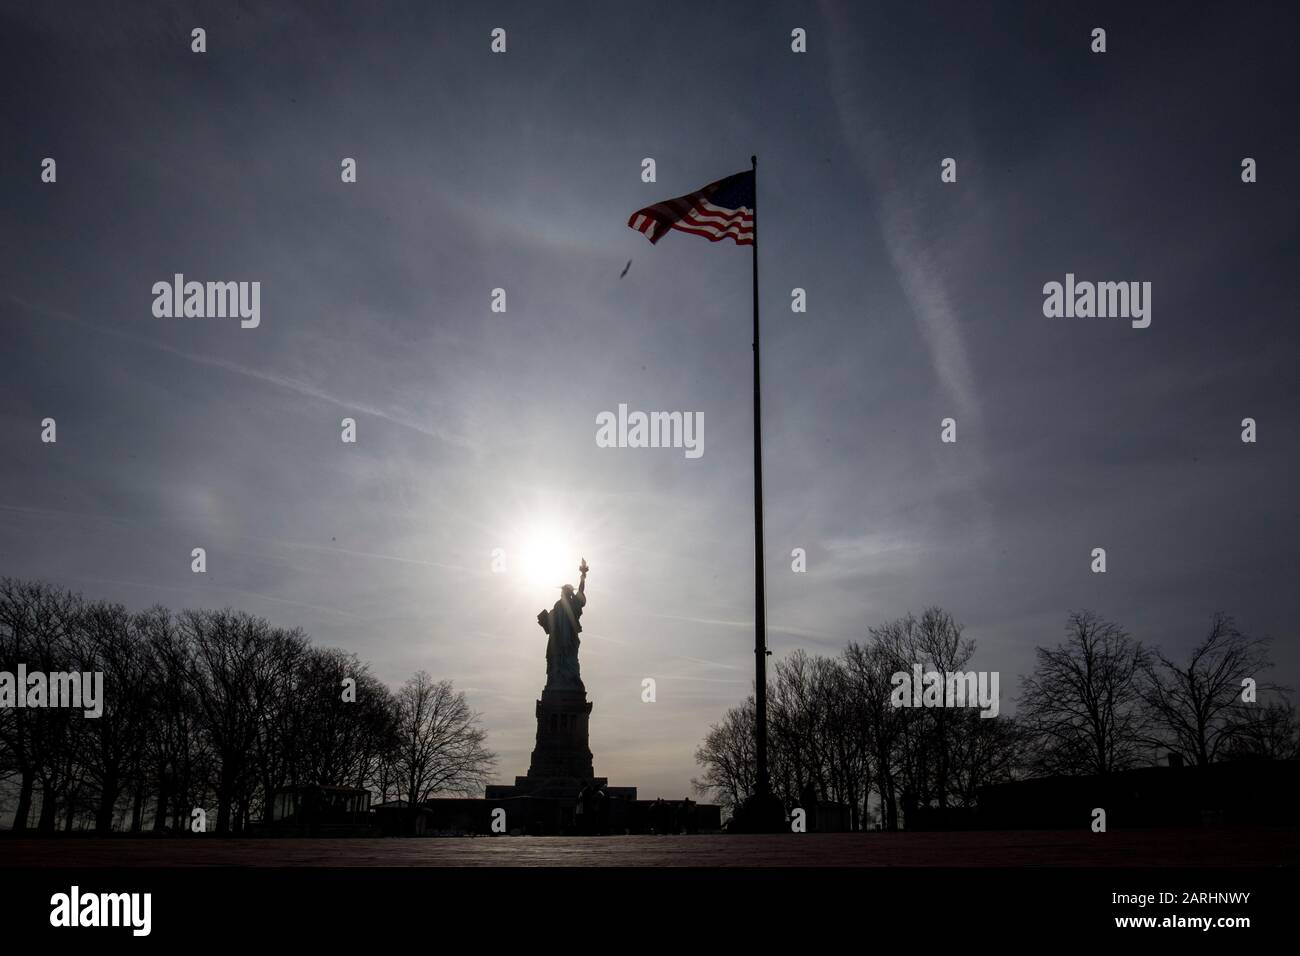 New York , USA. Statue of Liberty in silhouette on Liberty Island. Stock Photo